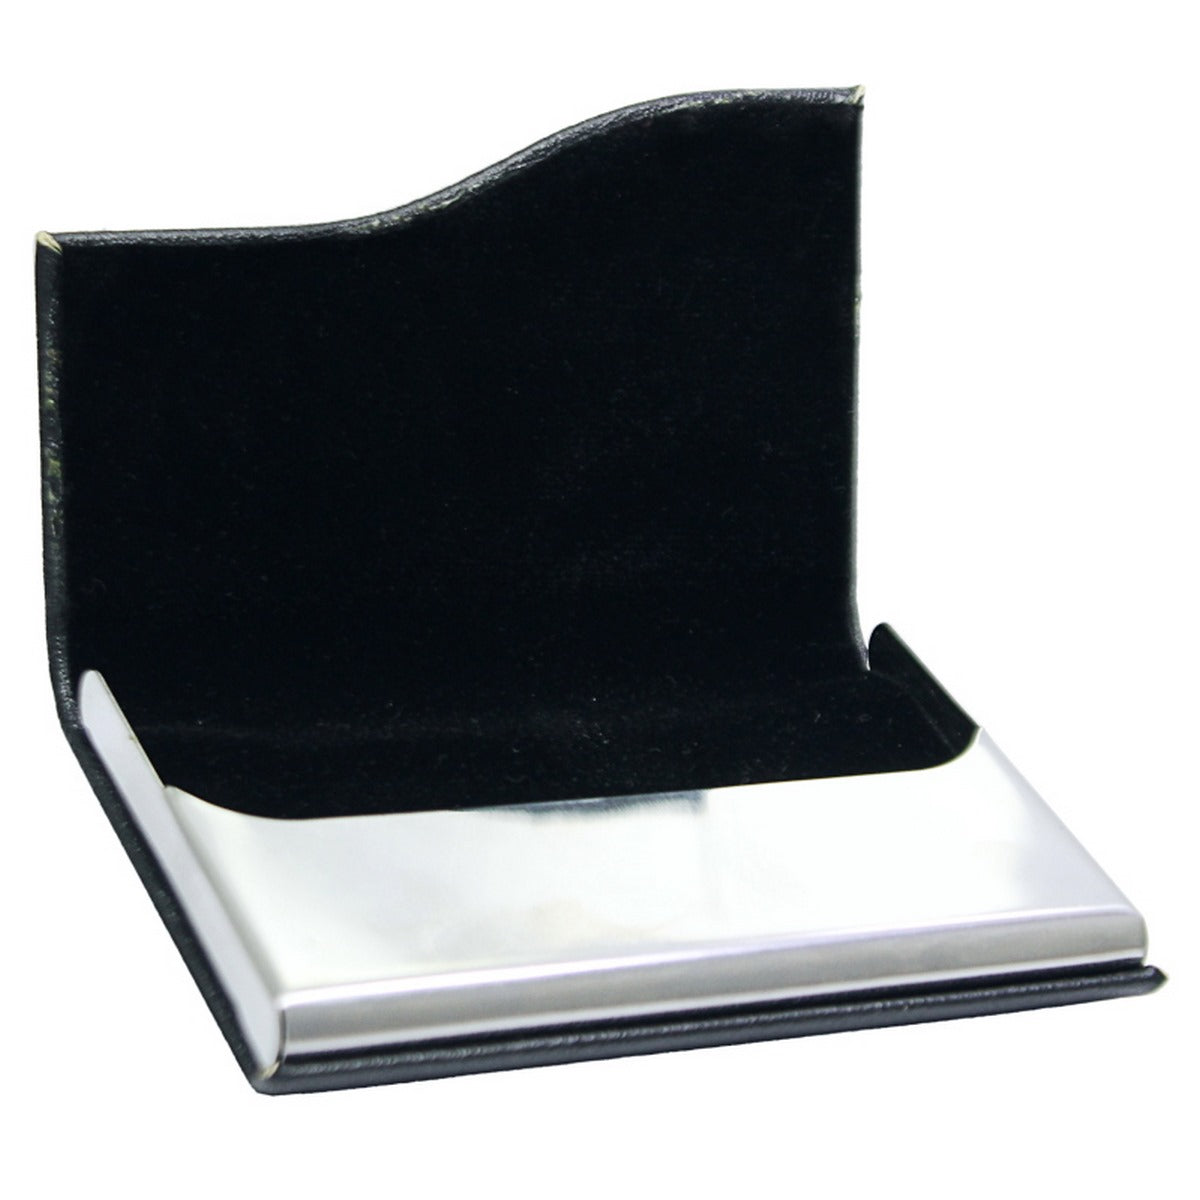 Black Magnetic Business Visiting Card Holder - For Corporate Gifting, Event Gifting, Freebies, Promotions JA (132) MCH29